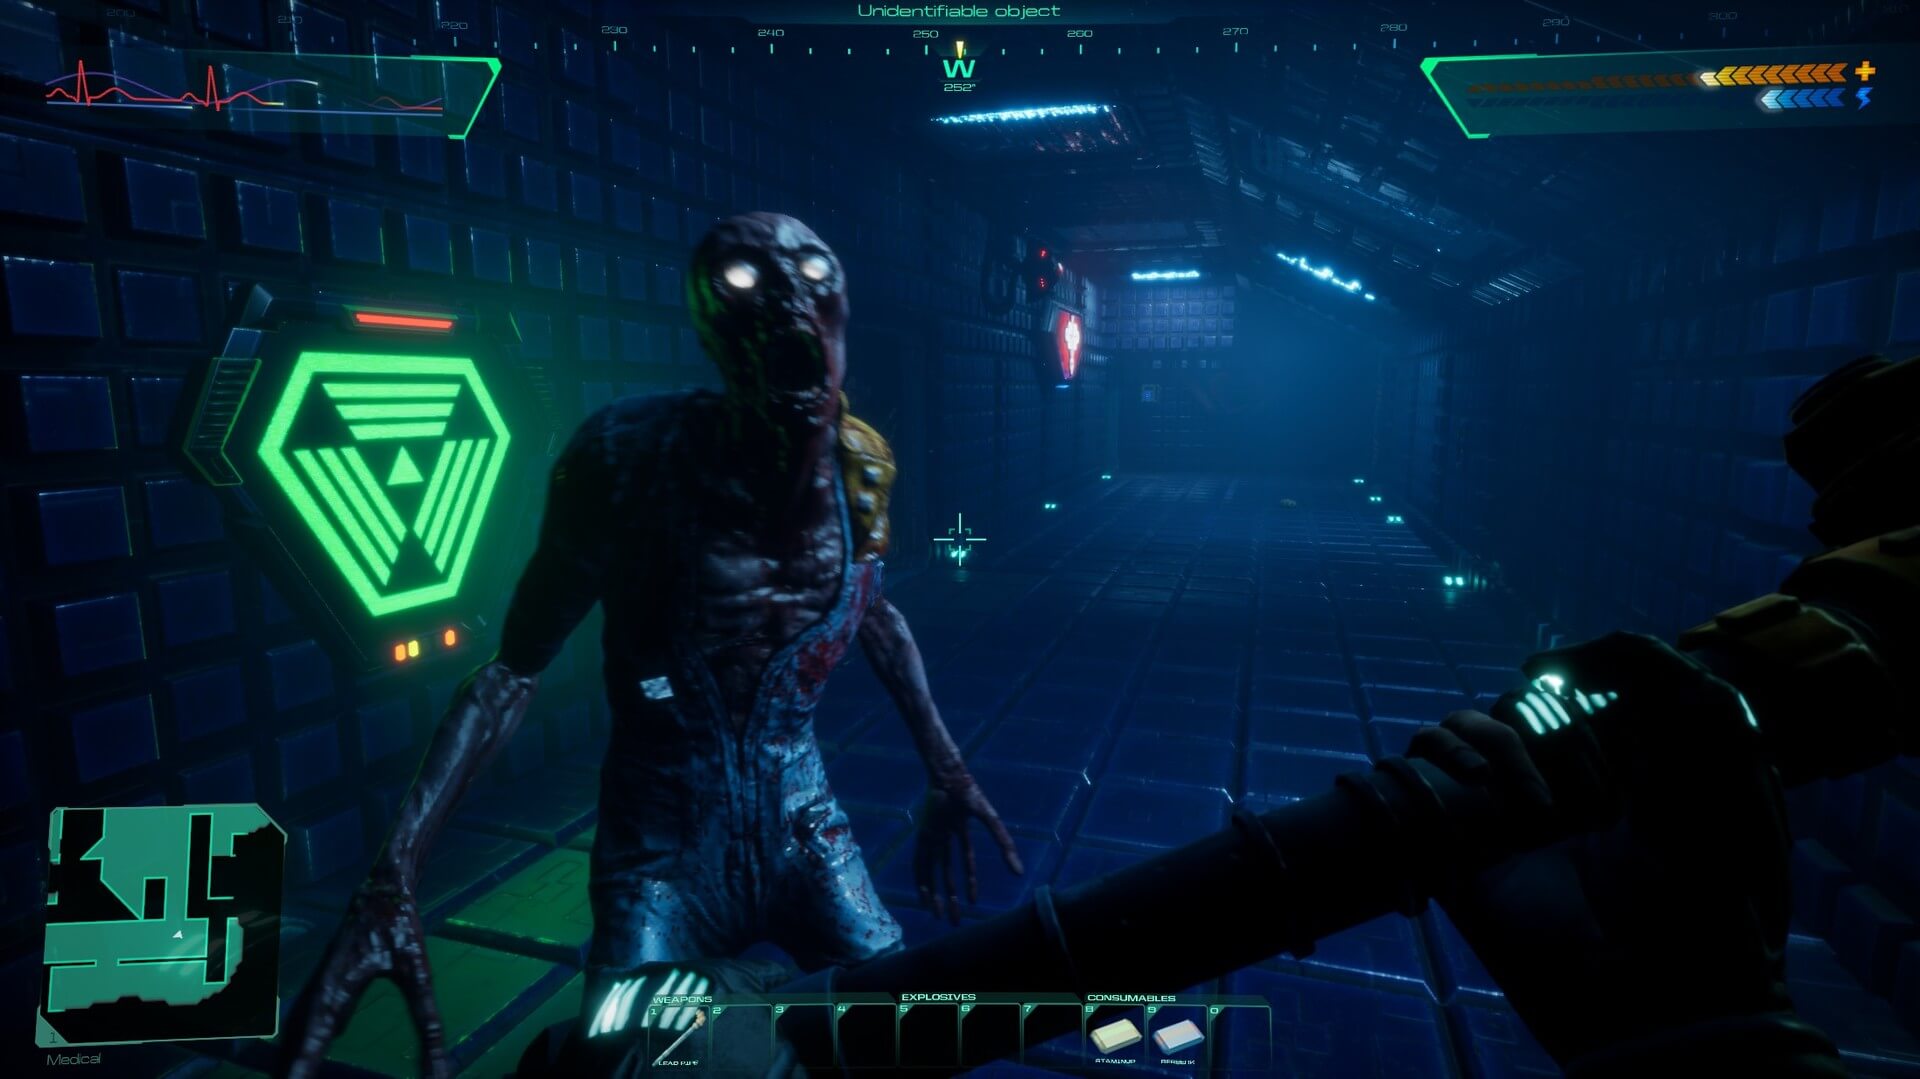 new games like system shock 2